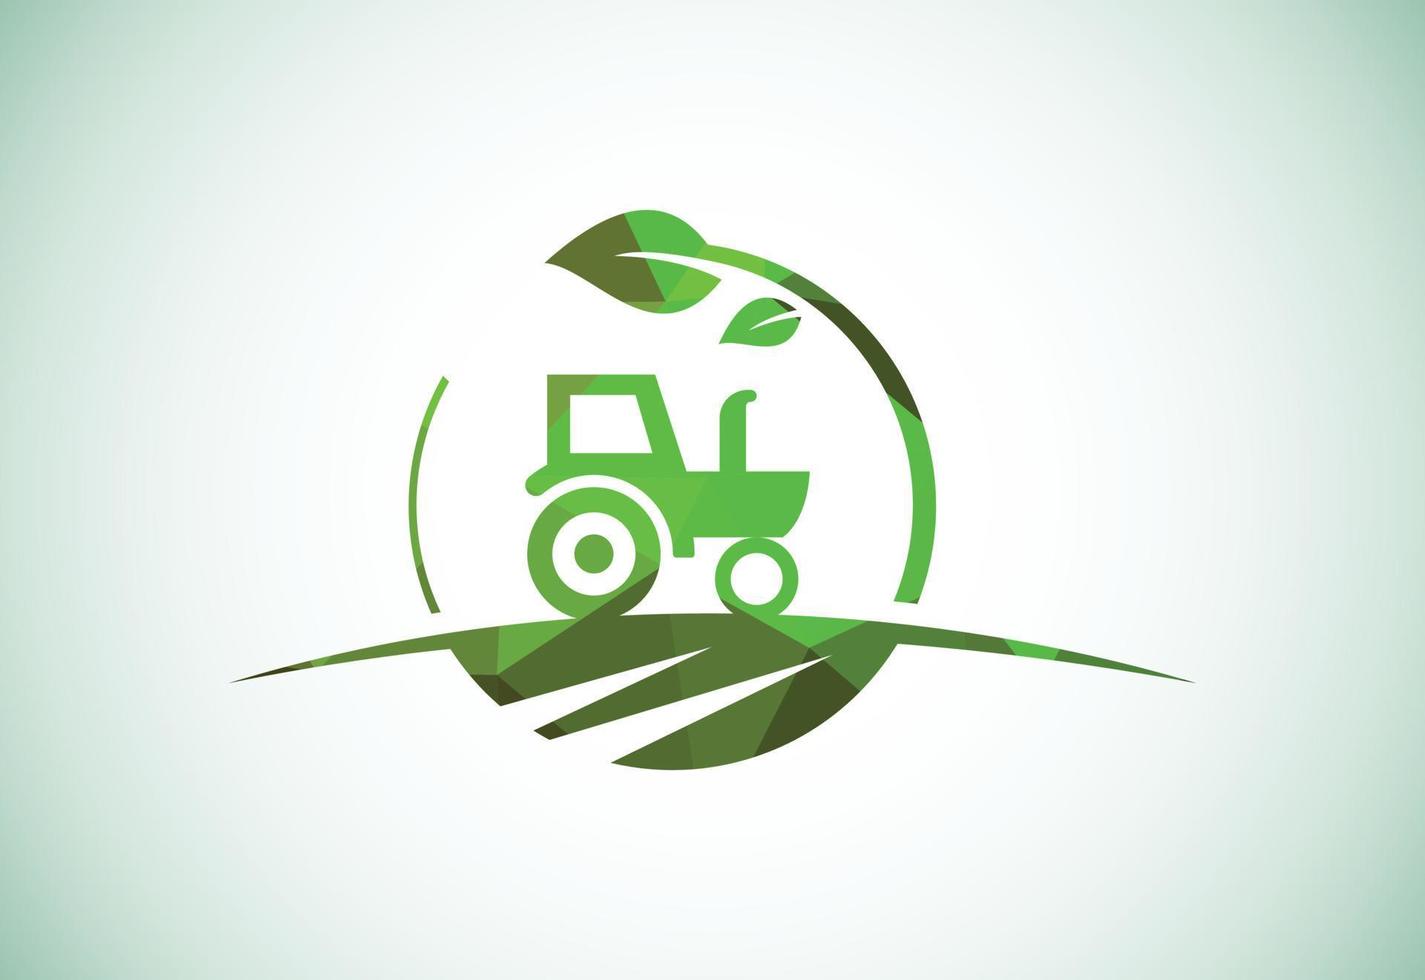 Tractor or farm low poly style logo design, suitable for any business related to agriculture industries. vector